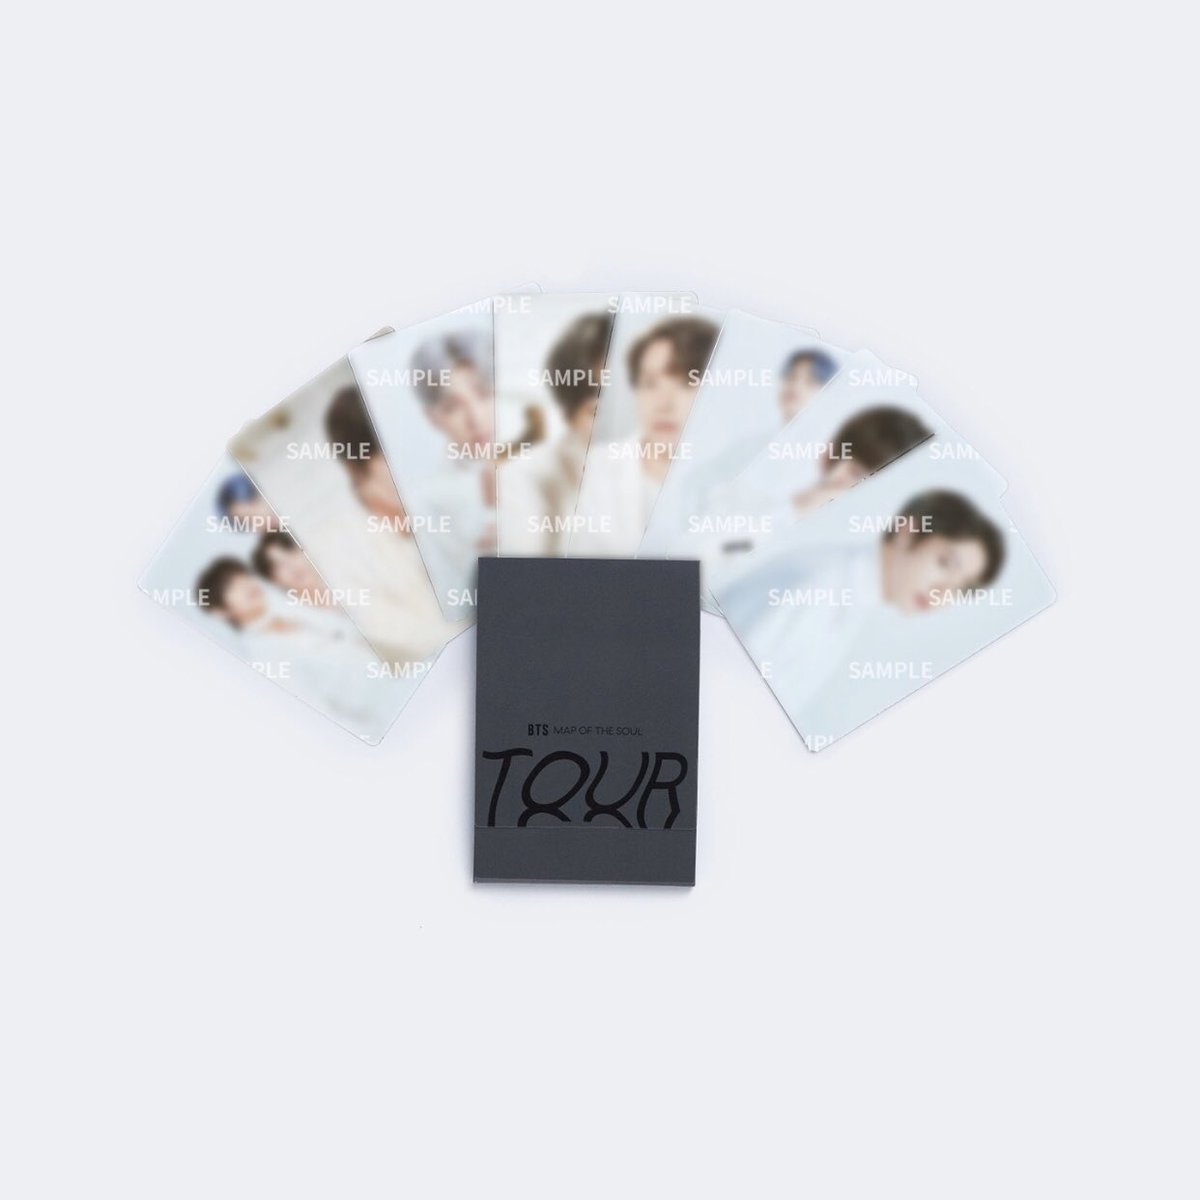 WTS / LFB | PH ONLY FROM: WEVERSE SHOP <GLOBAL>BTS Map of The Soul Tour Mini Photo Cards or PCs / TINGI or SPLIT PHP250 EACHAVAILABLE MEMBERSRM - 1SUGA - 1JHOPE - 1COMMENT “MINE - MEMBER”